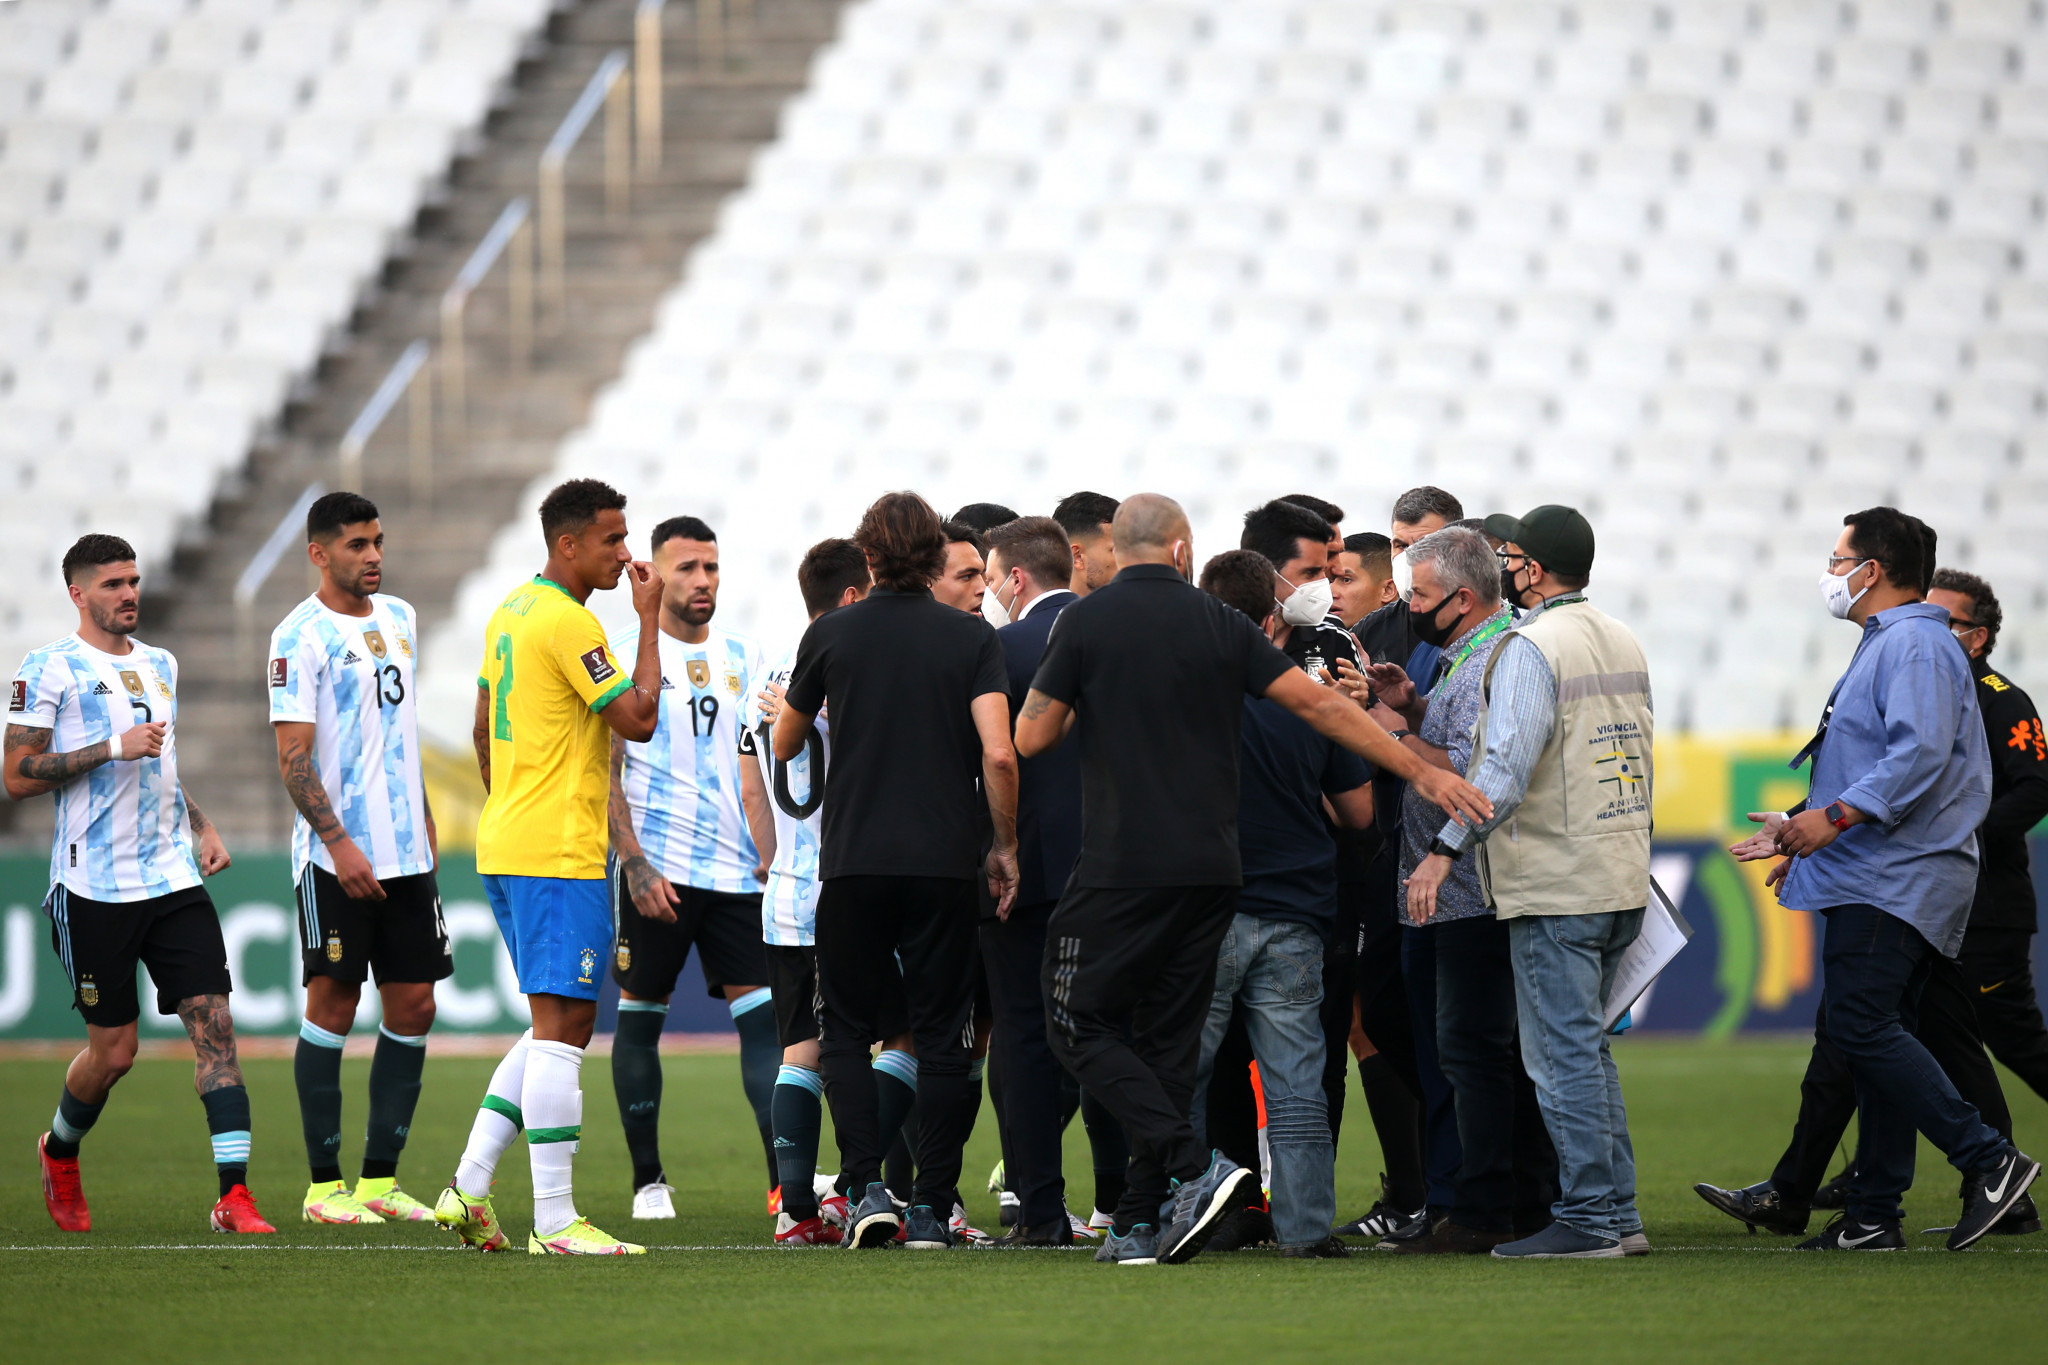 The original FIFA World Cup qualifier between Brazil and Argentina descended into chaos when Brazilian health officials stormed the pitch ©Getty Images